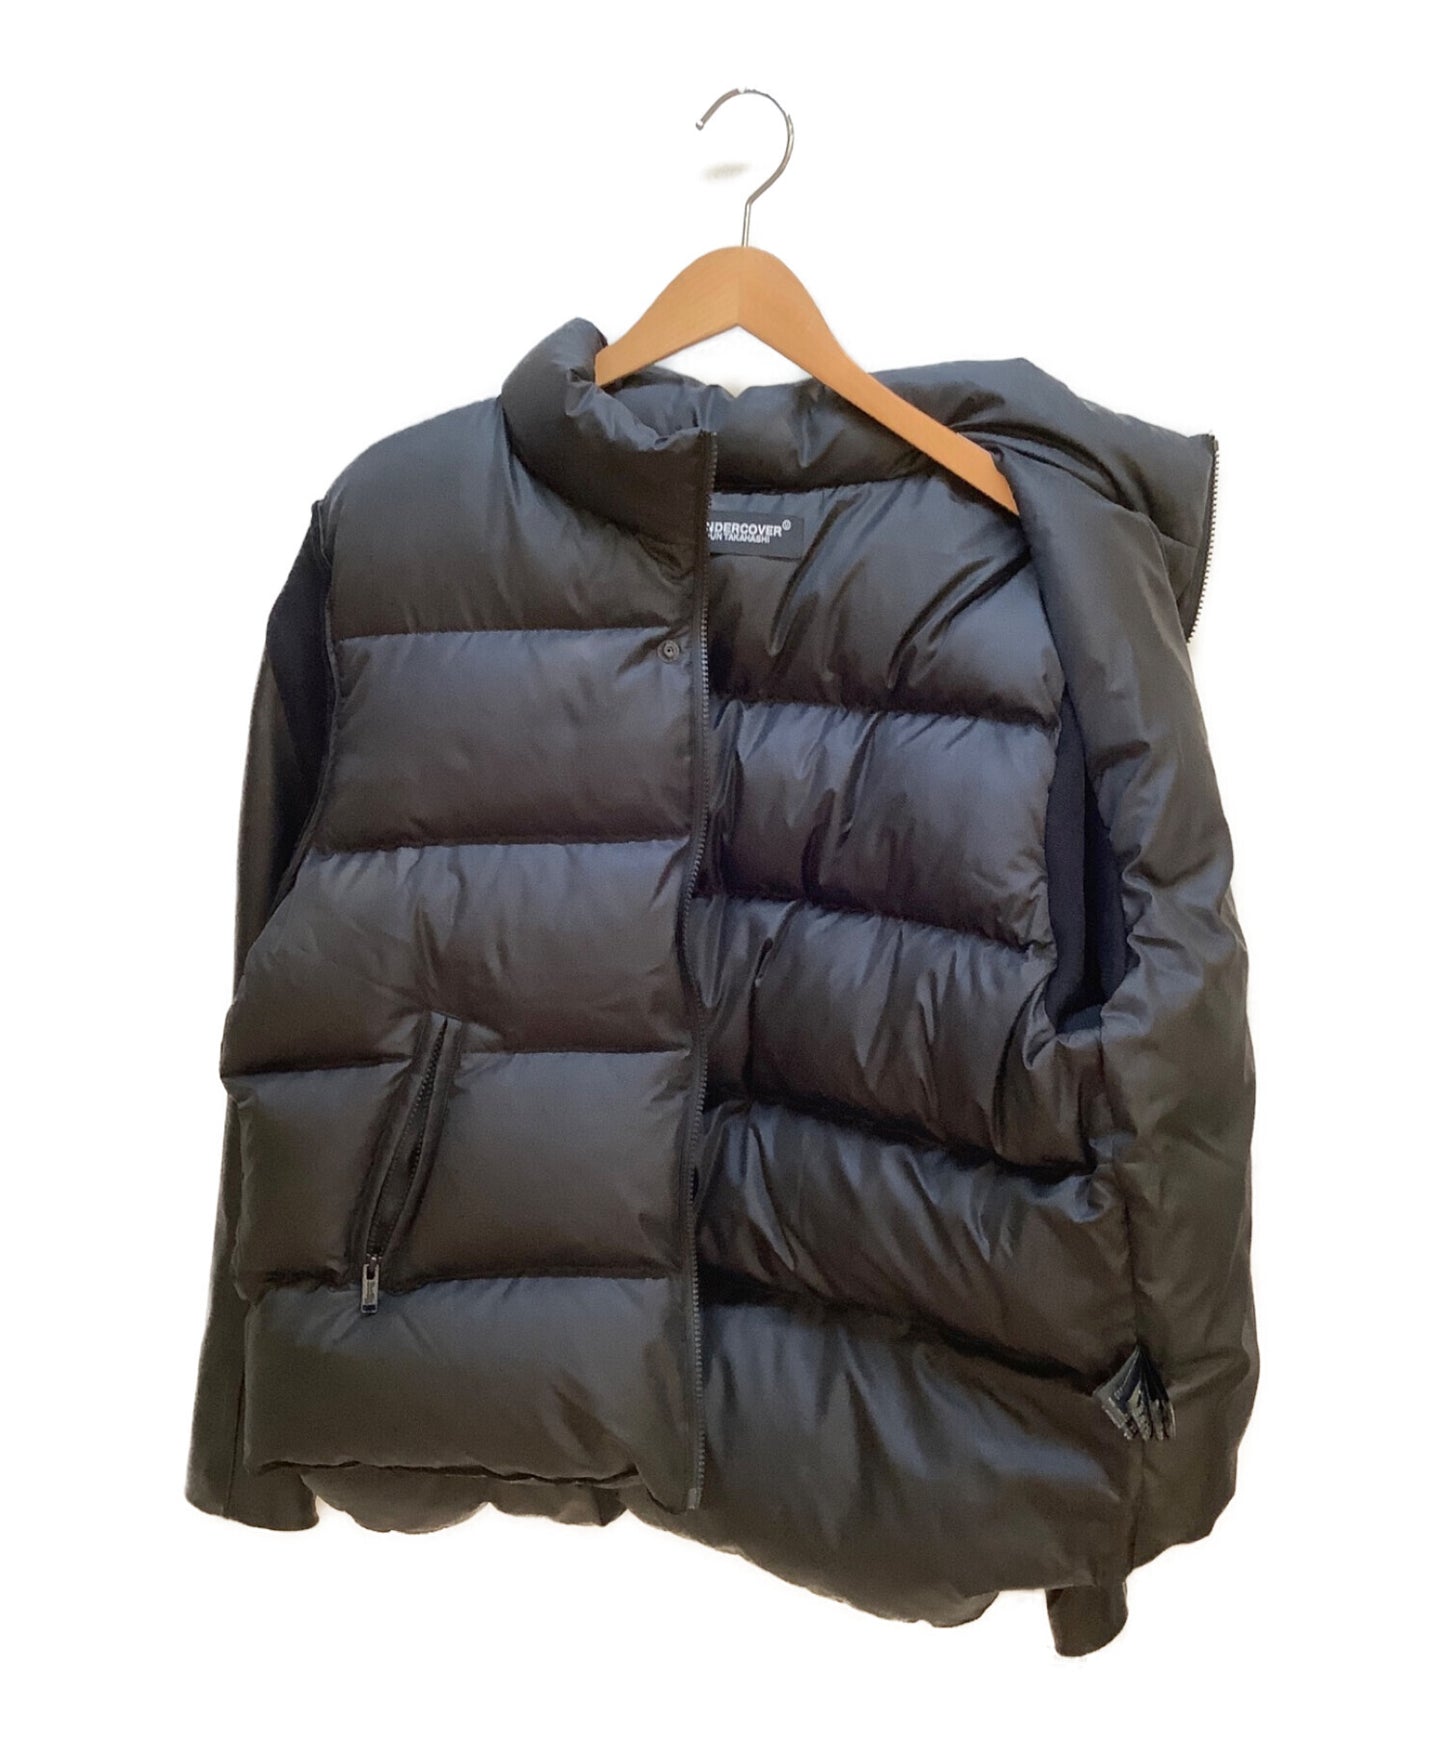 undercover down jacket uc2b9208